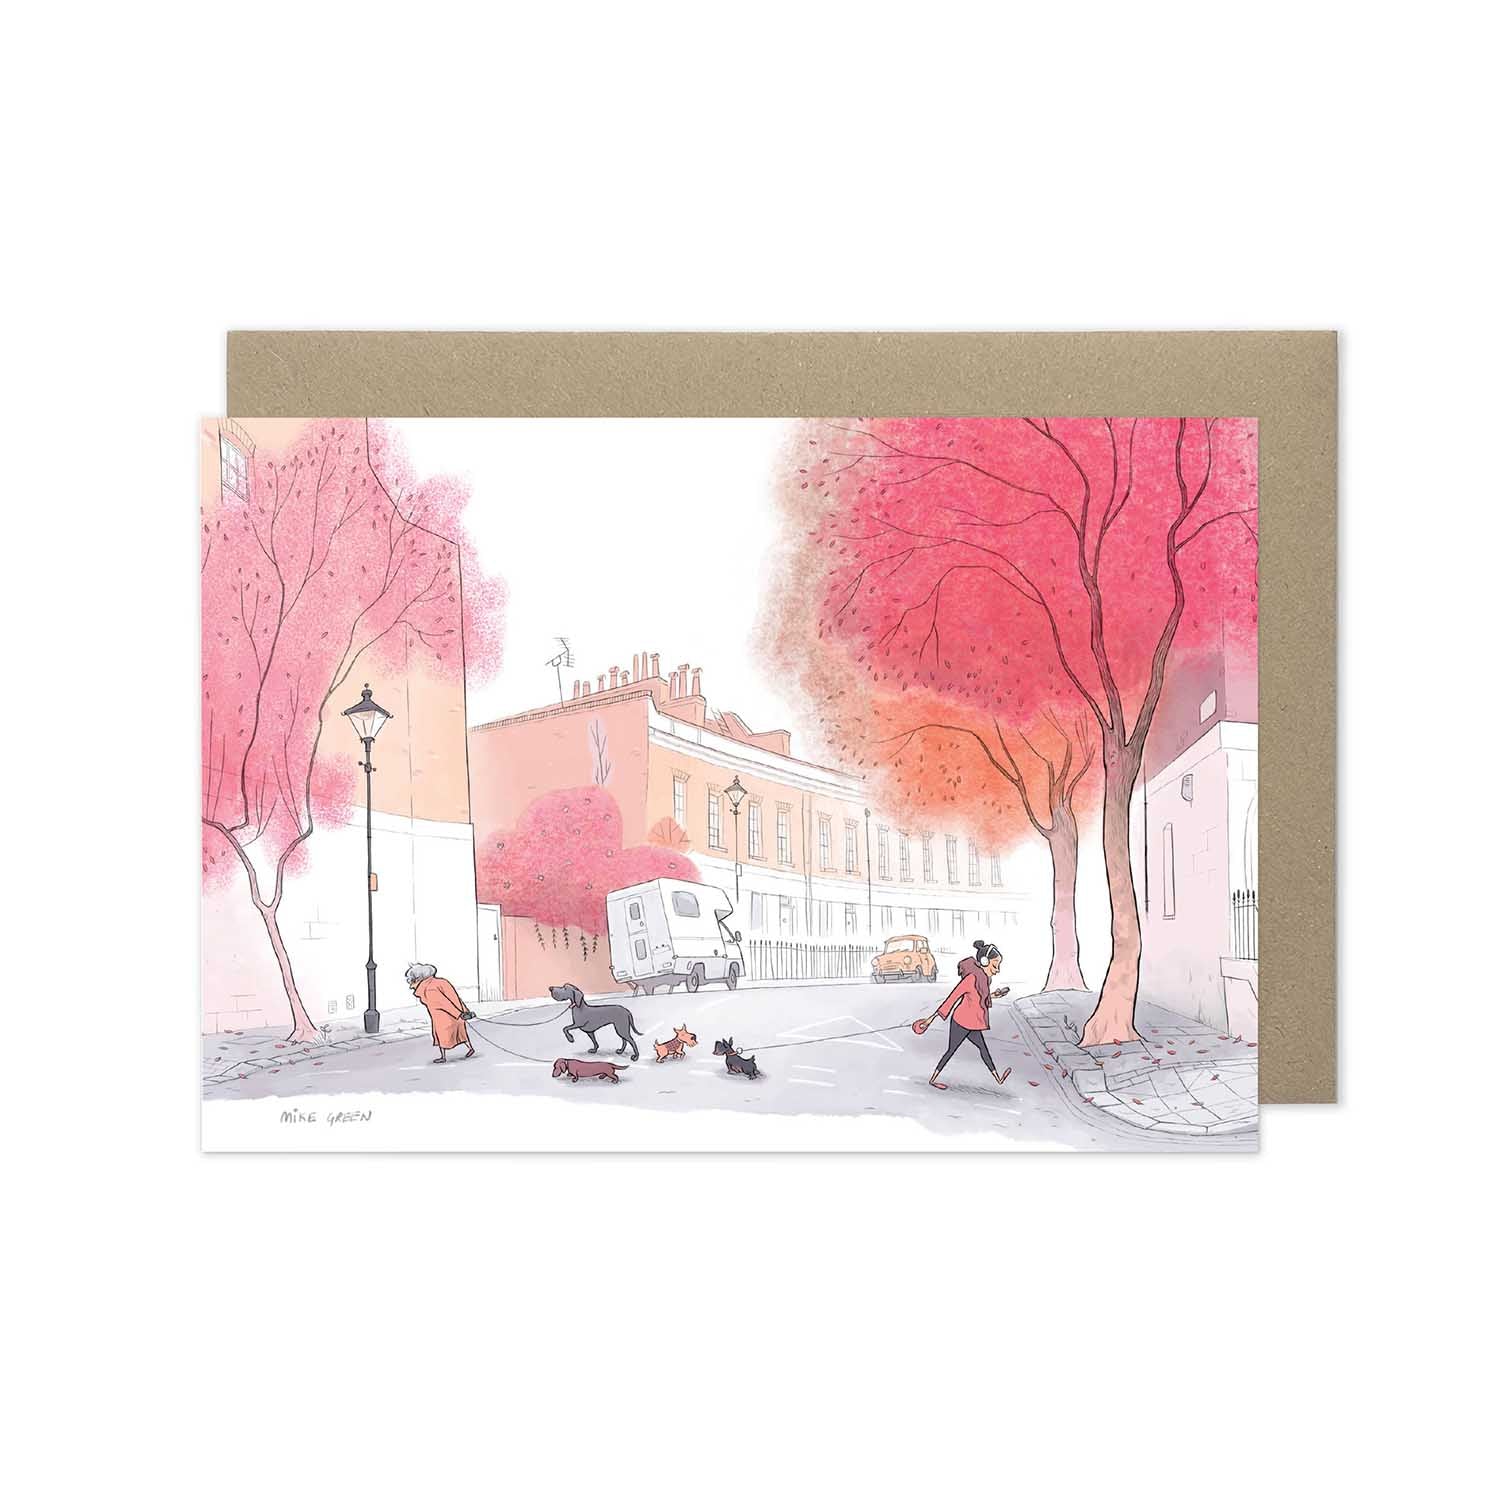 Dogs catch up in the morning on a London street with autumn trees in this beautifully illustrated greeting card by mike green illustration.